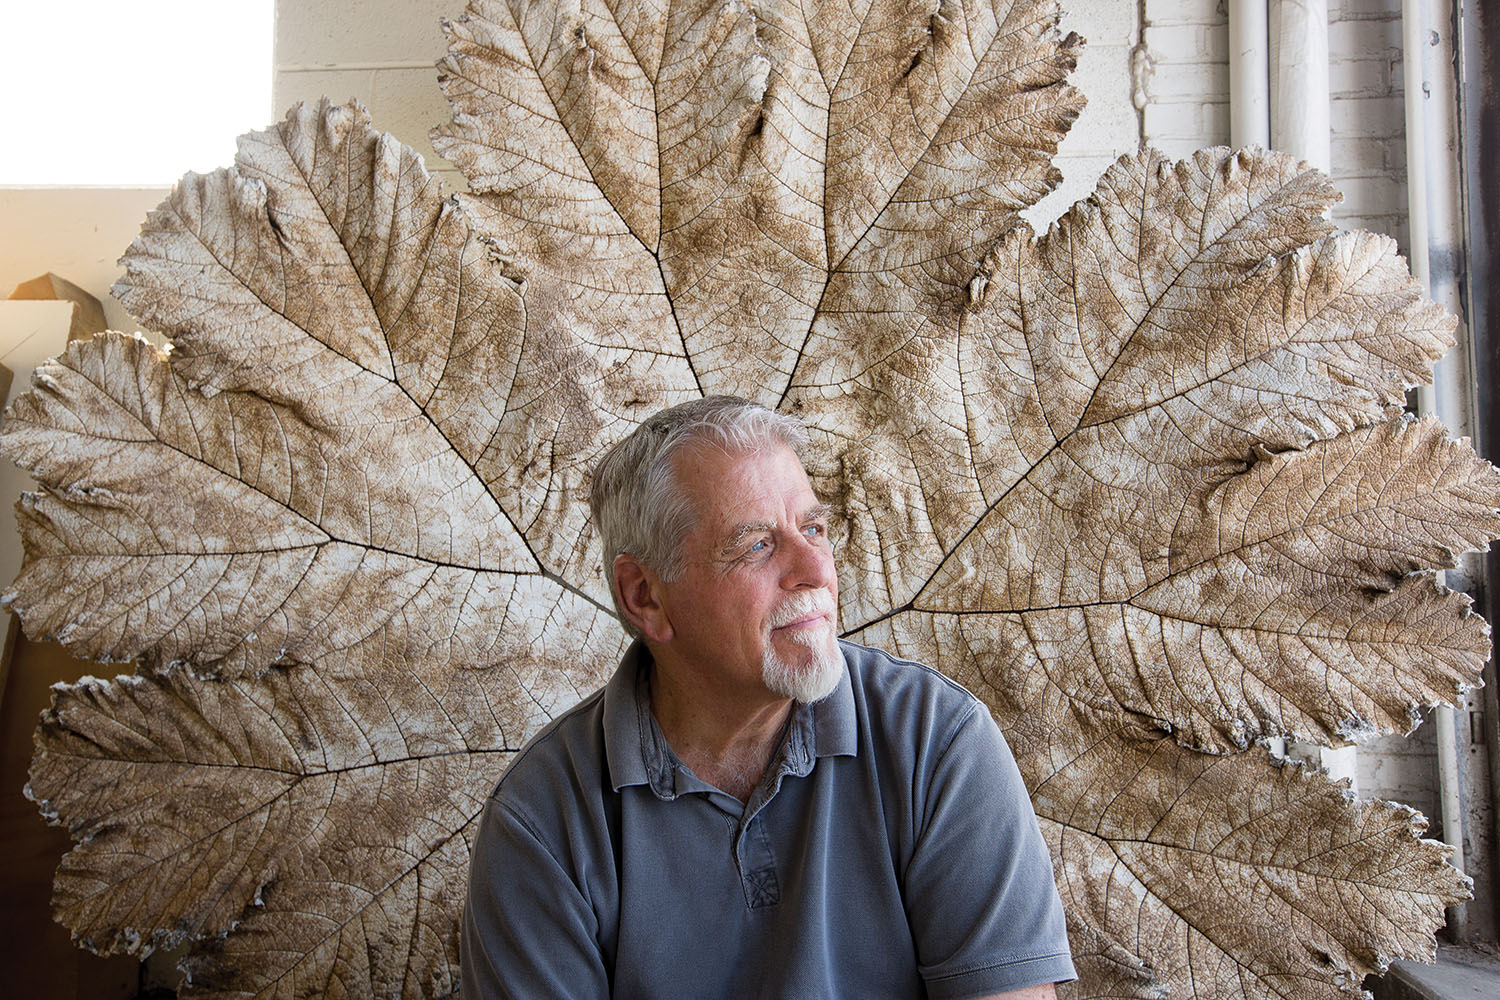 “I’m only half the artist, because I’m presented with perfection,” says John Wayne Jackson, who makes casts of the biggest leaves found in nature. Photo by Matt Rose